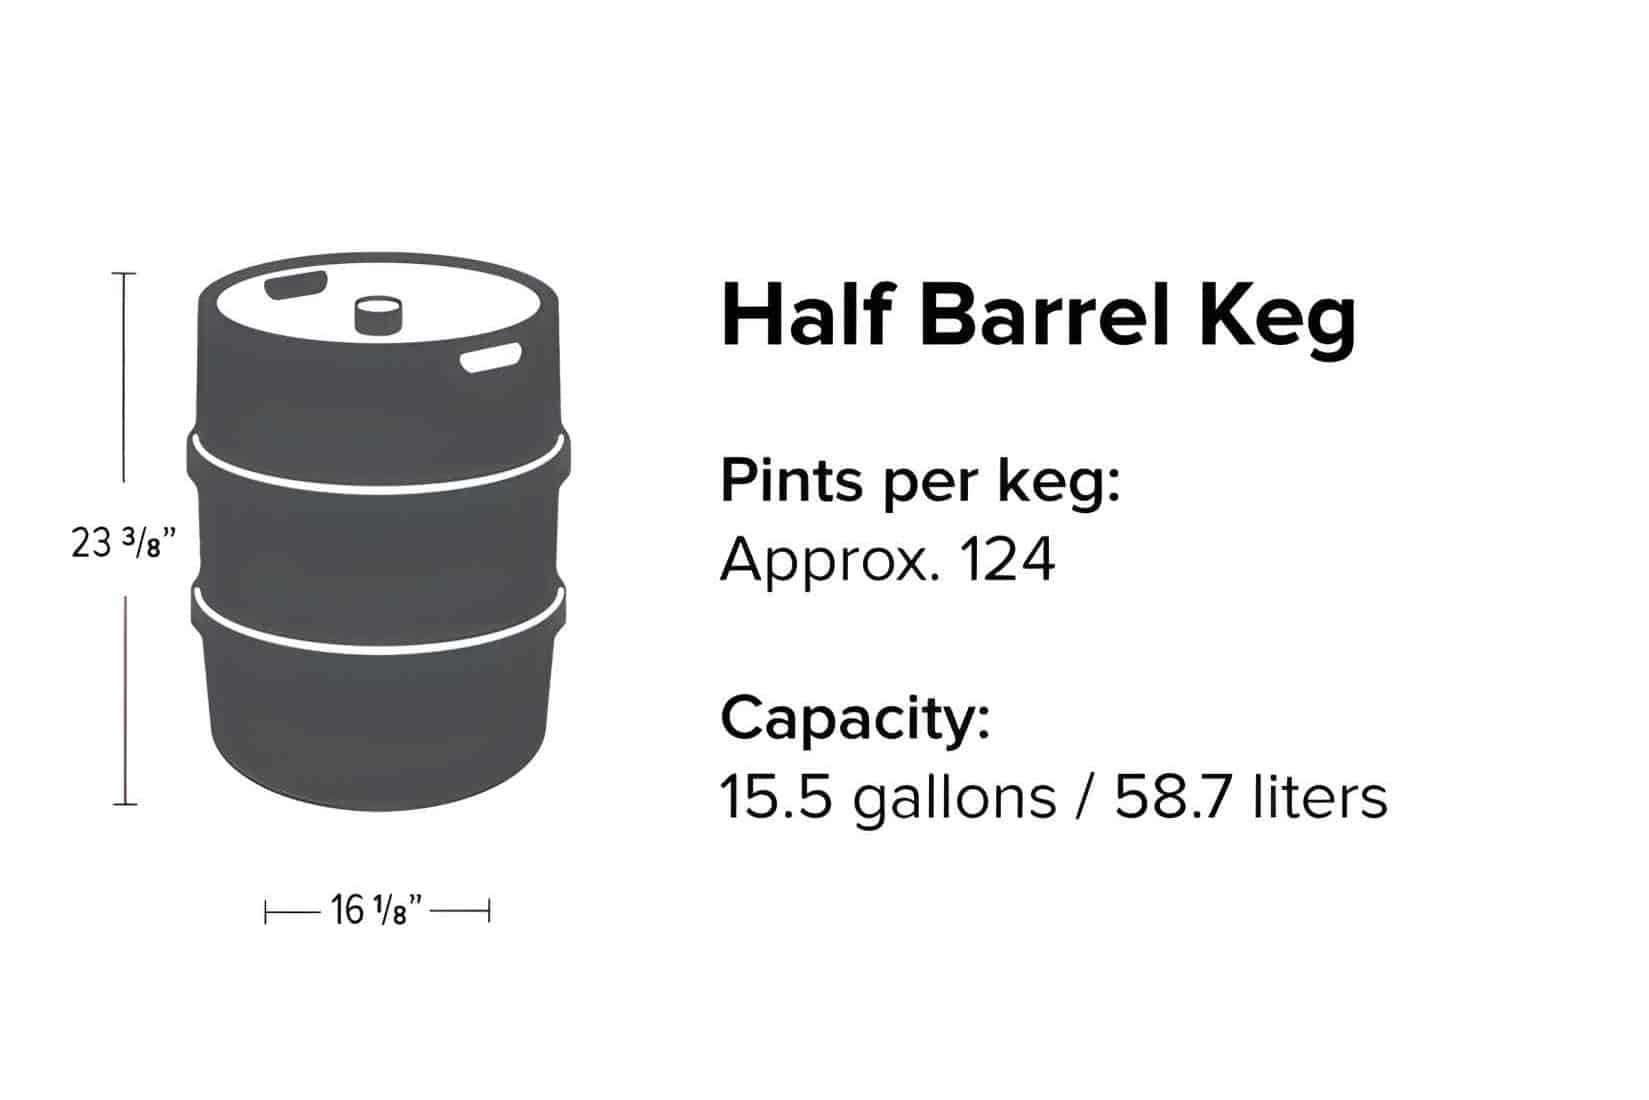 How many beers are in a Half-barrel keg